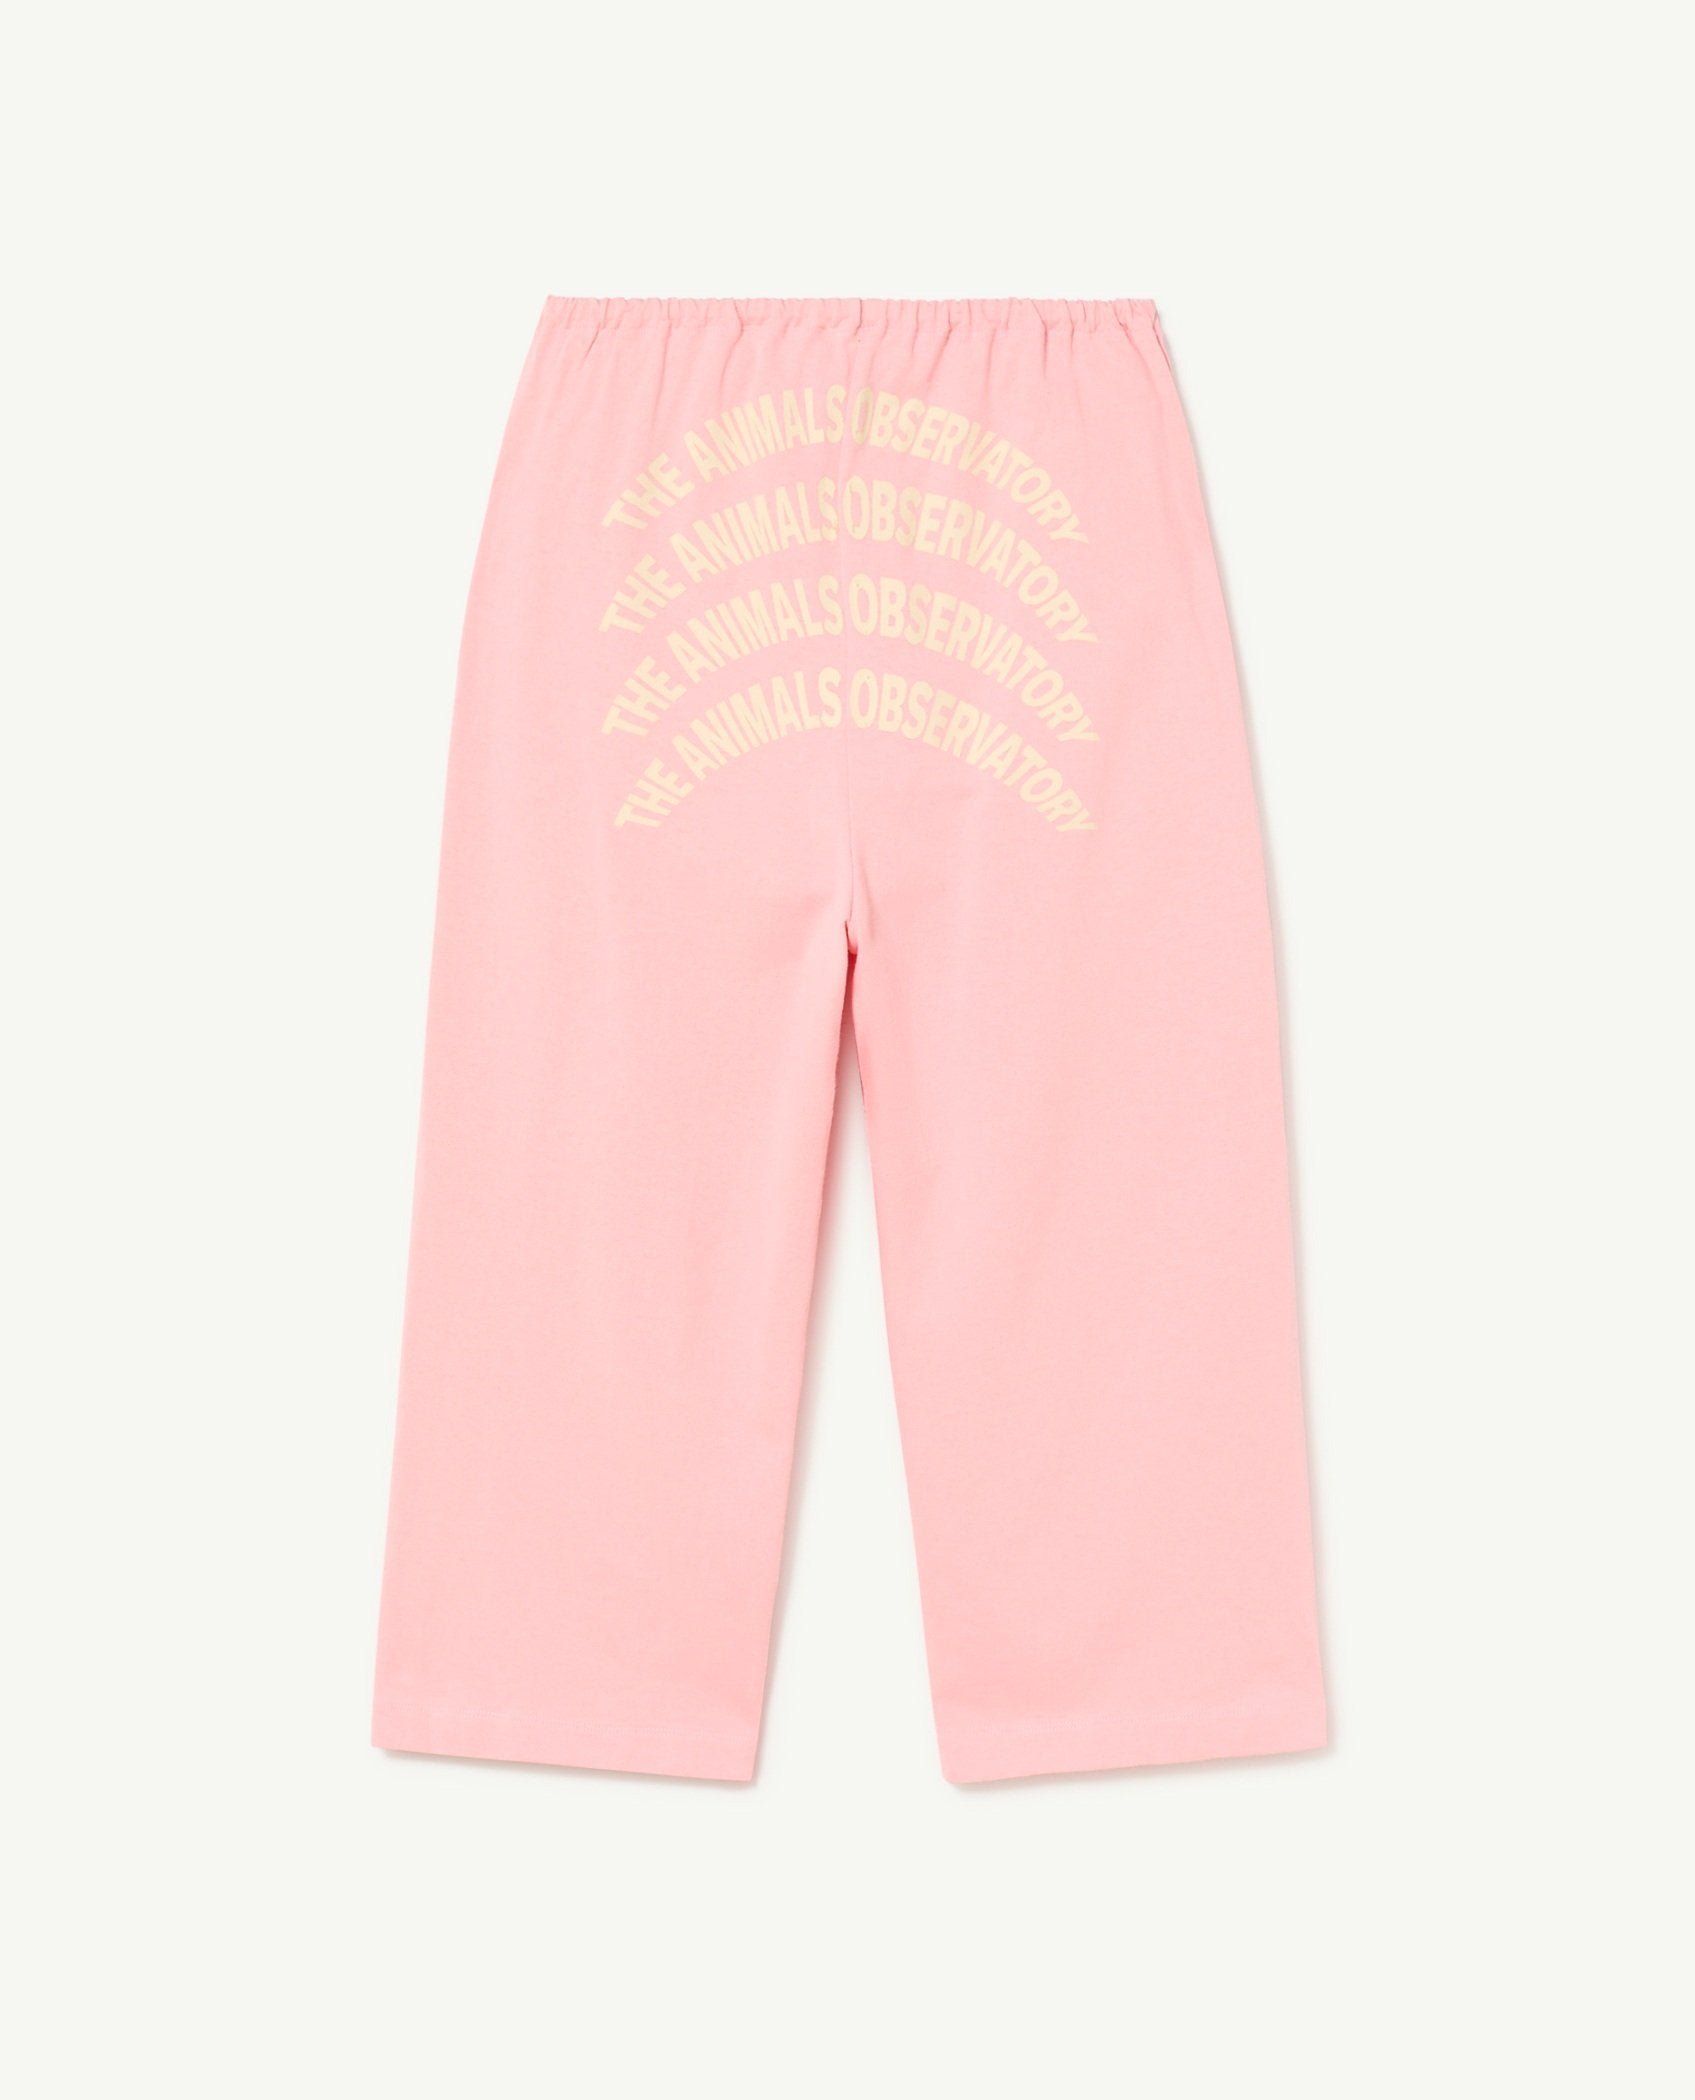 Pink Stag Sweatpants PRODUCT BACK